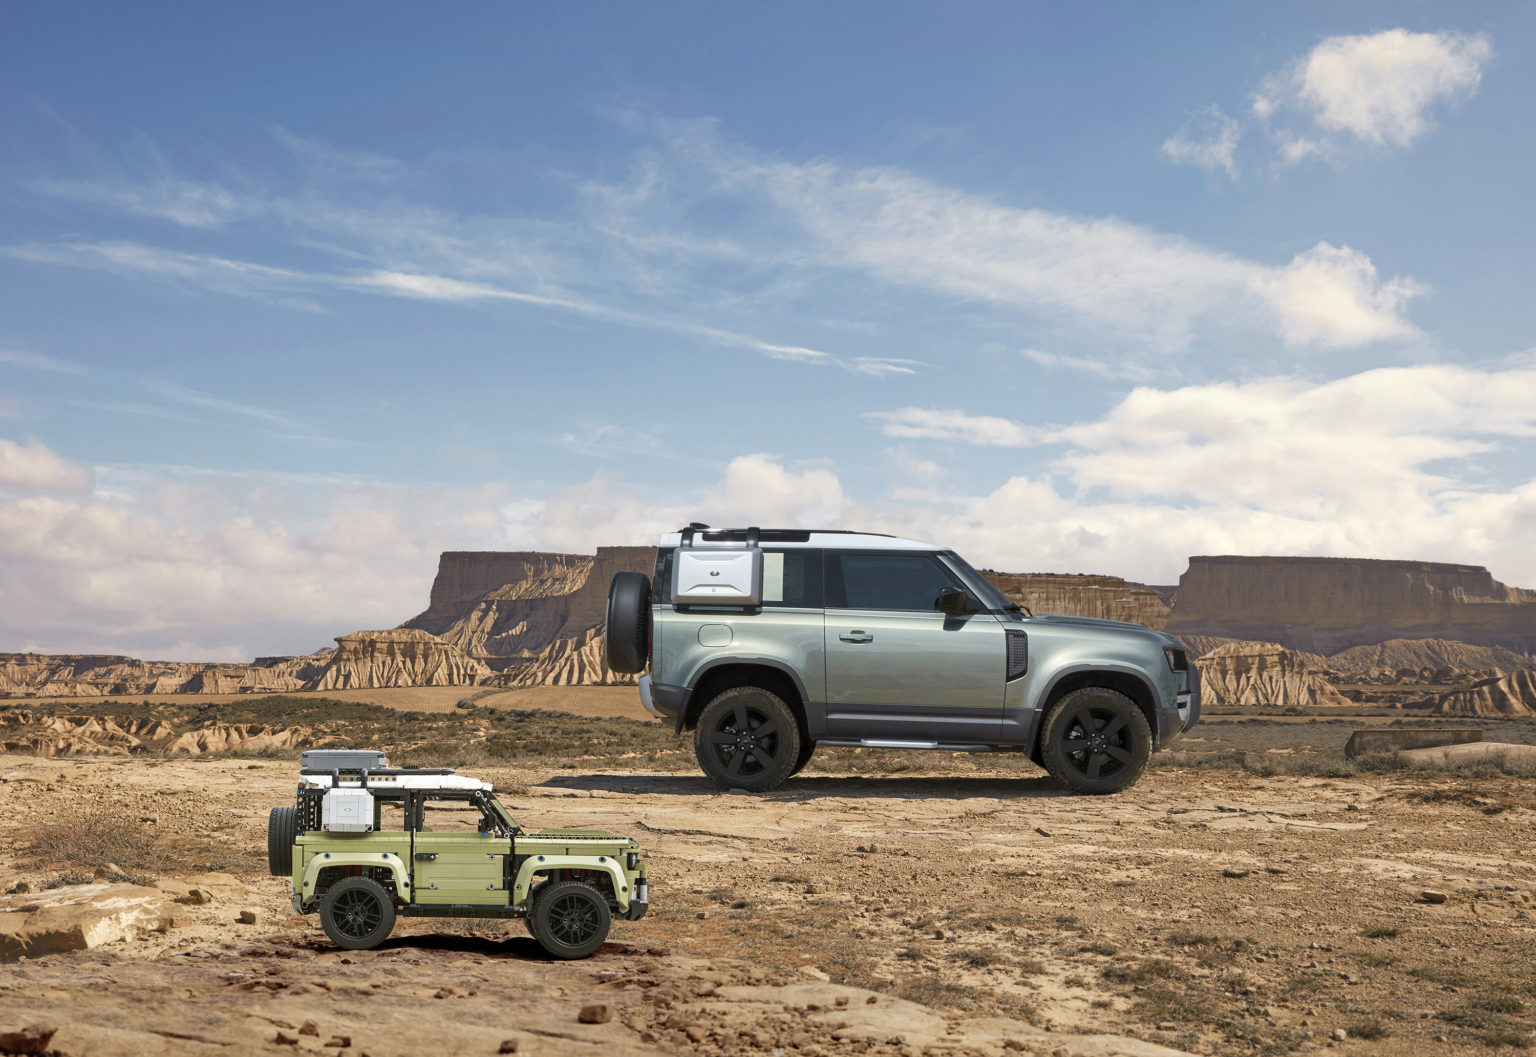 Land Rover has partnered with LEGO to create a Defender Technica vehicle.